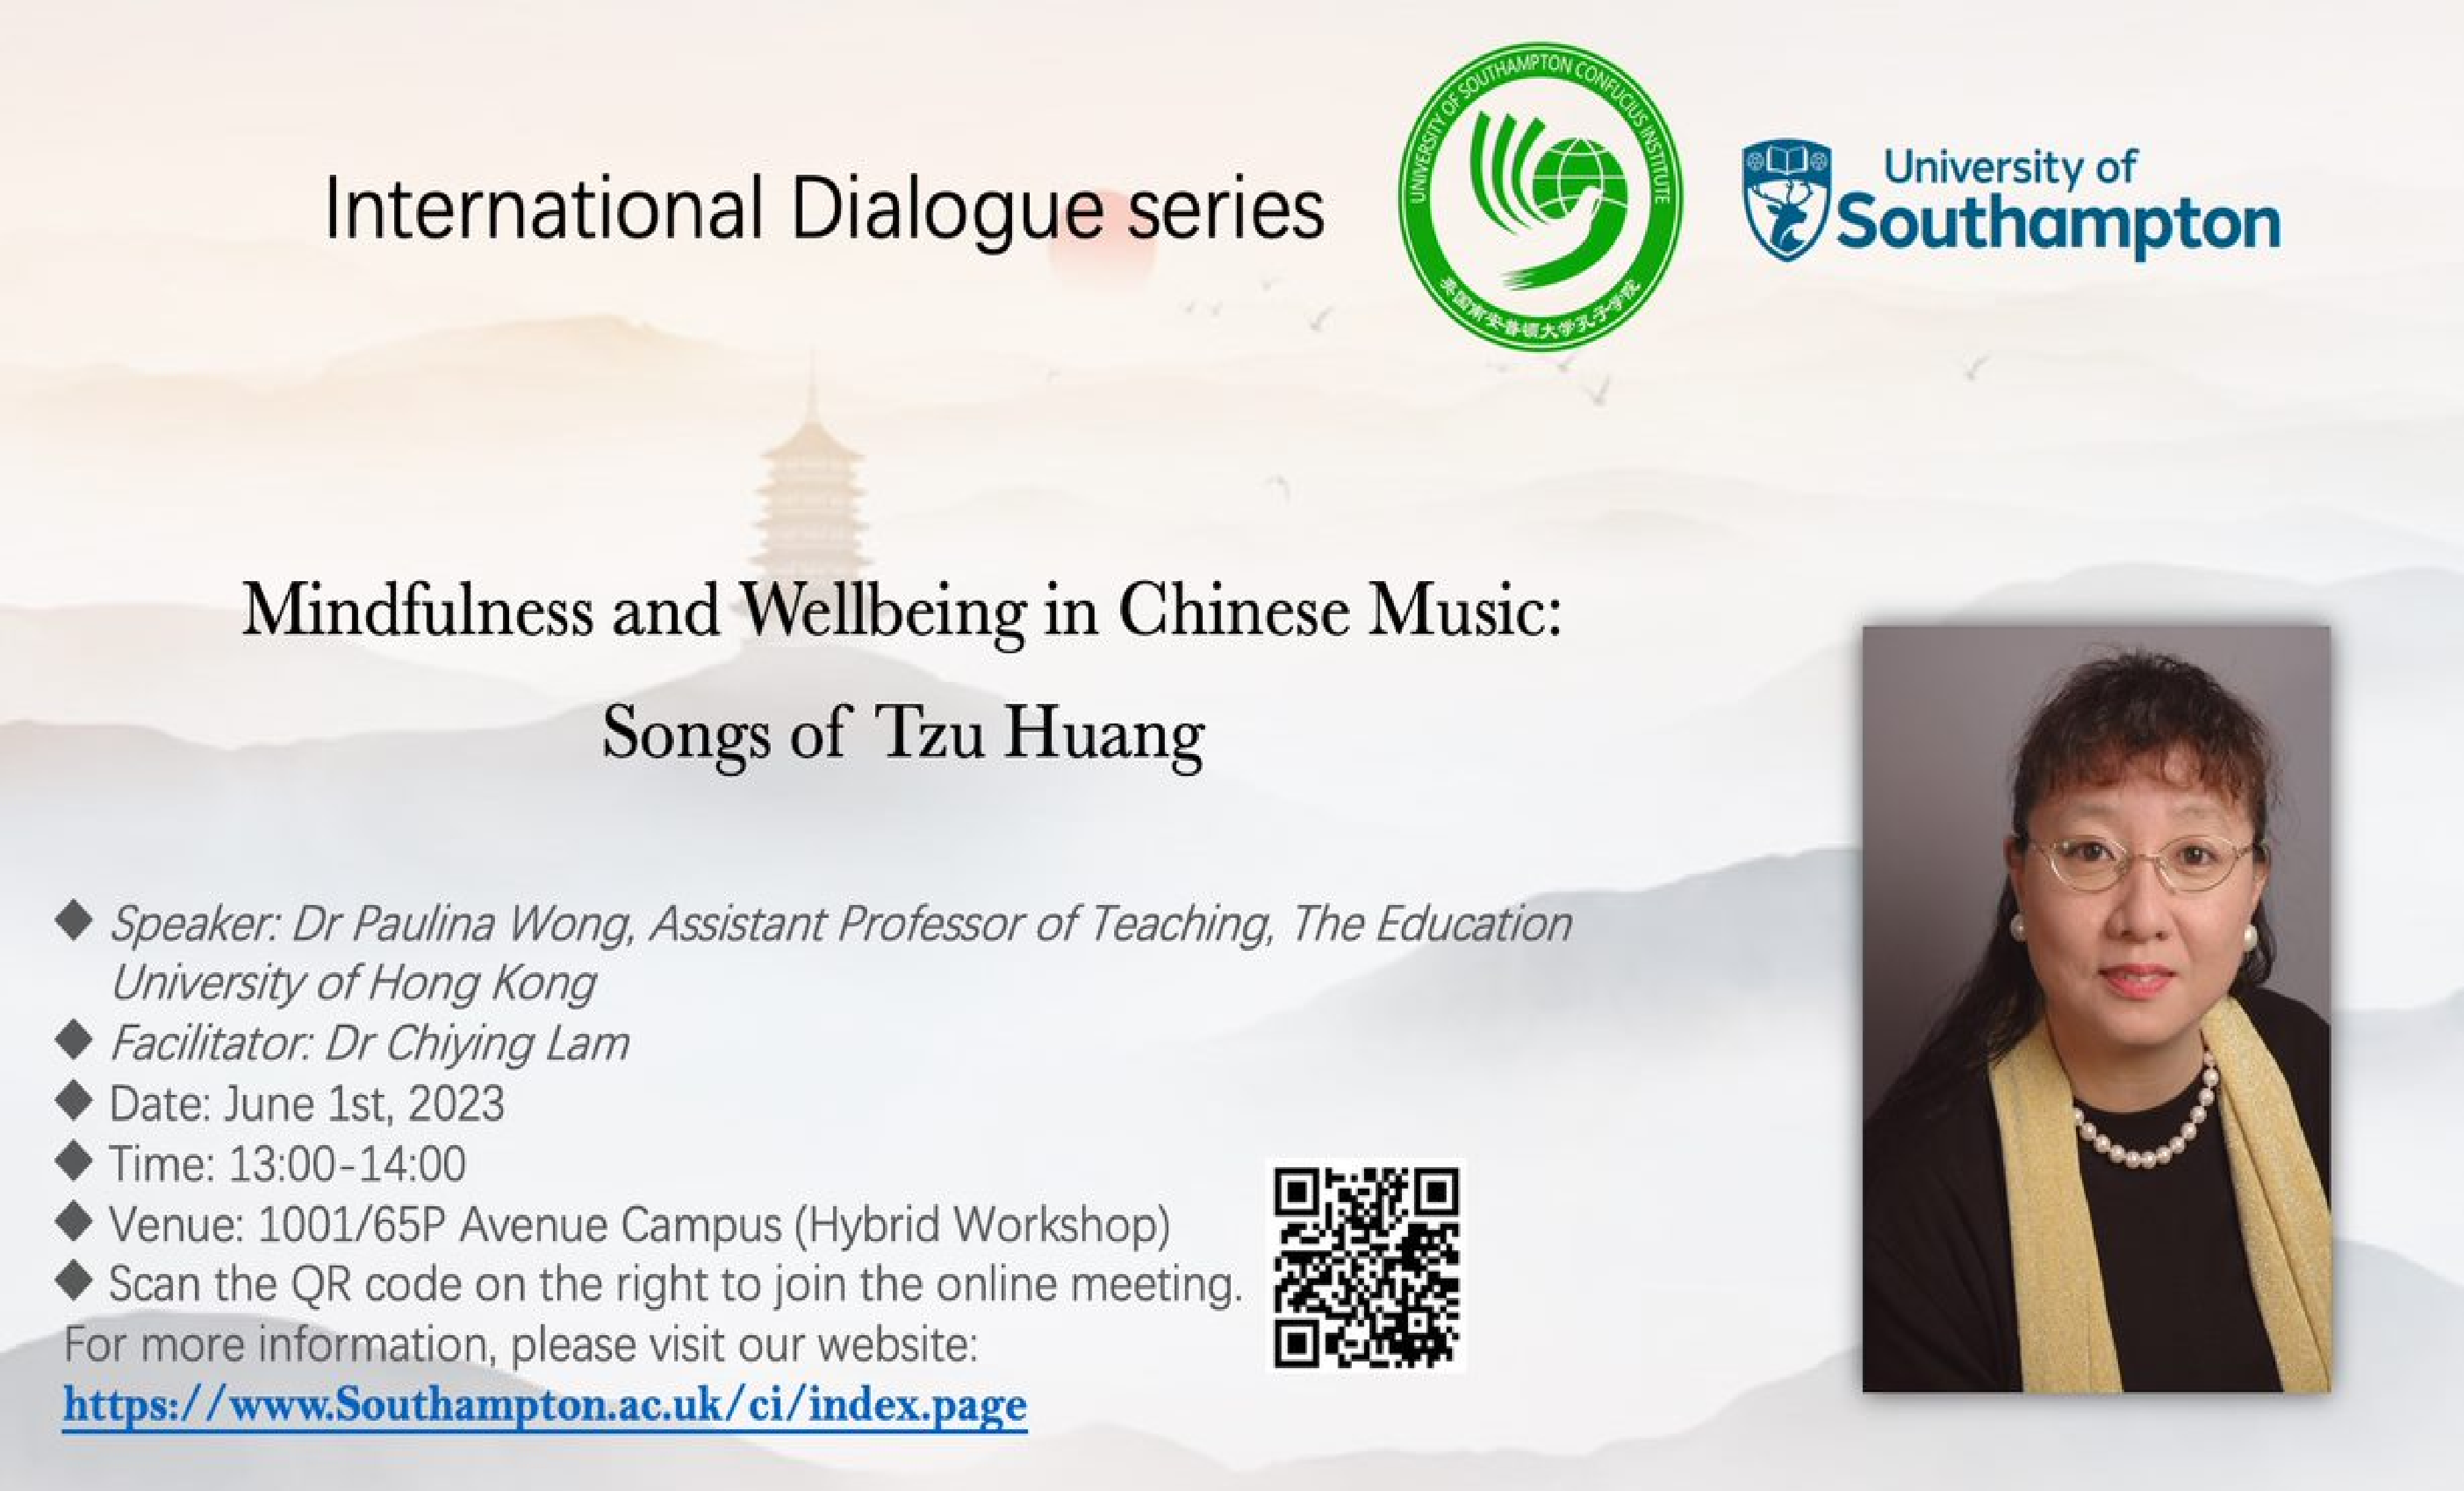 Mindfulness and Wellbeing in Chinese Music